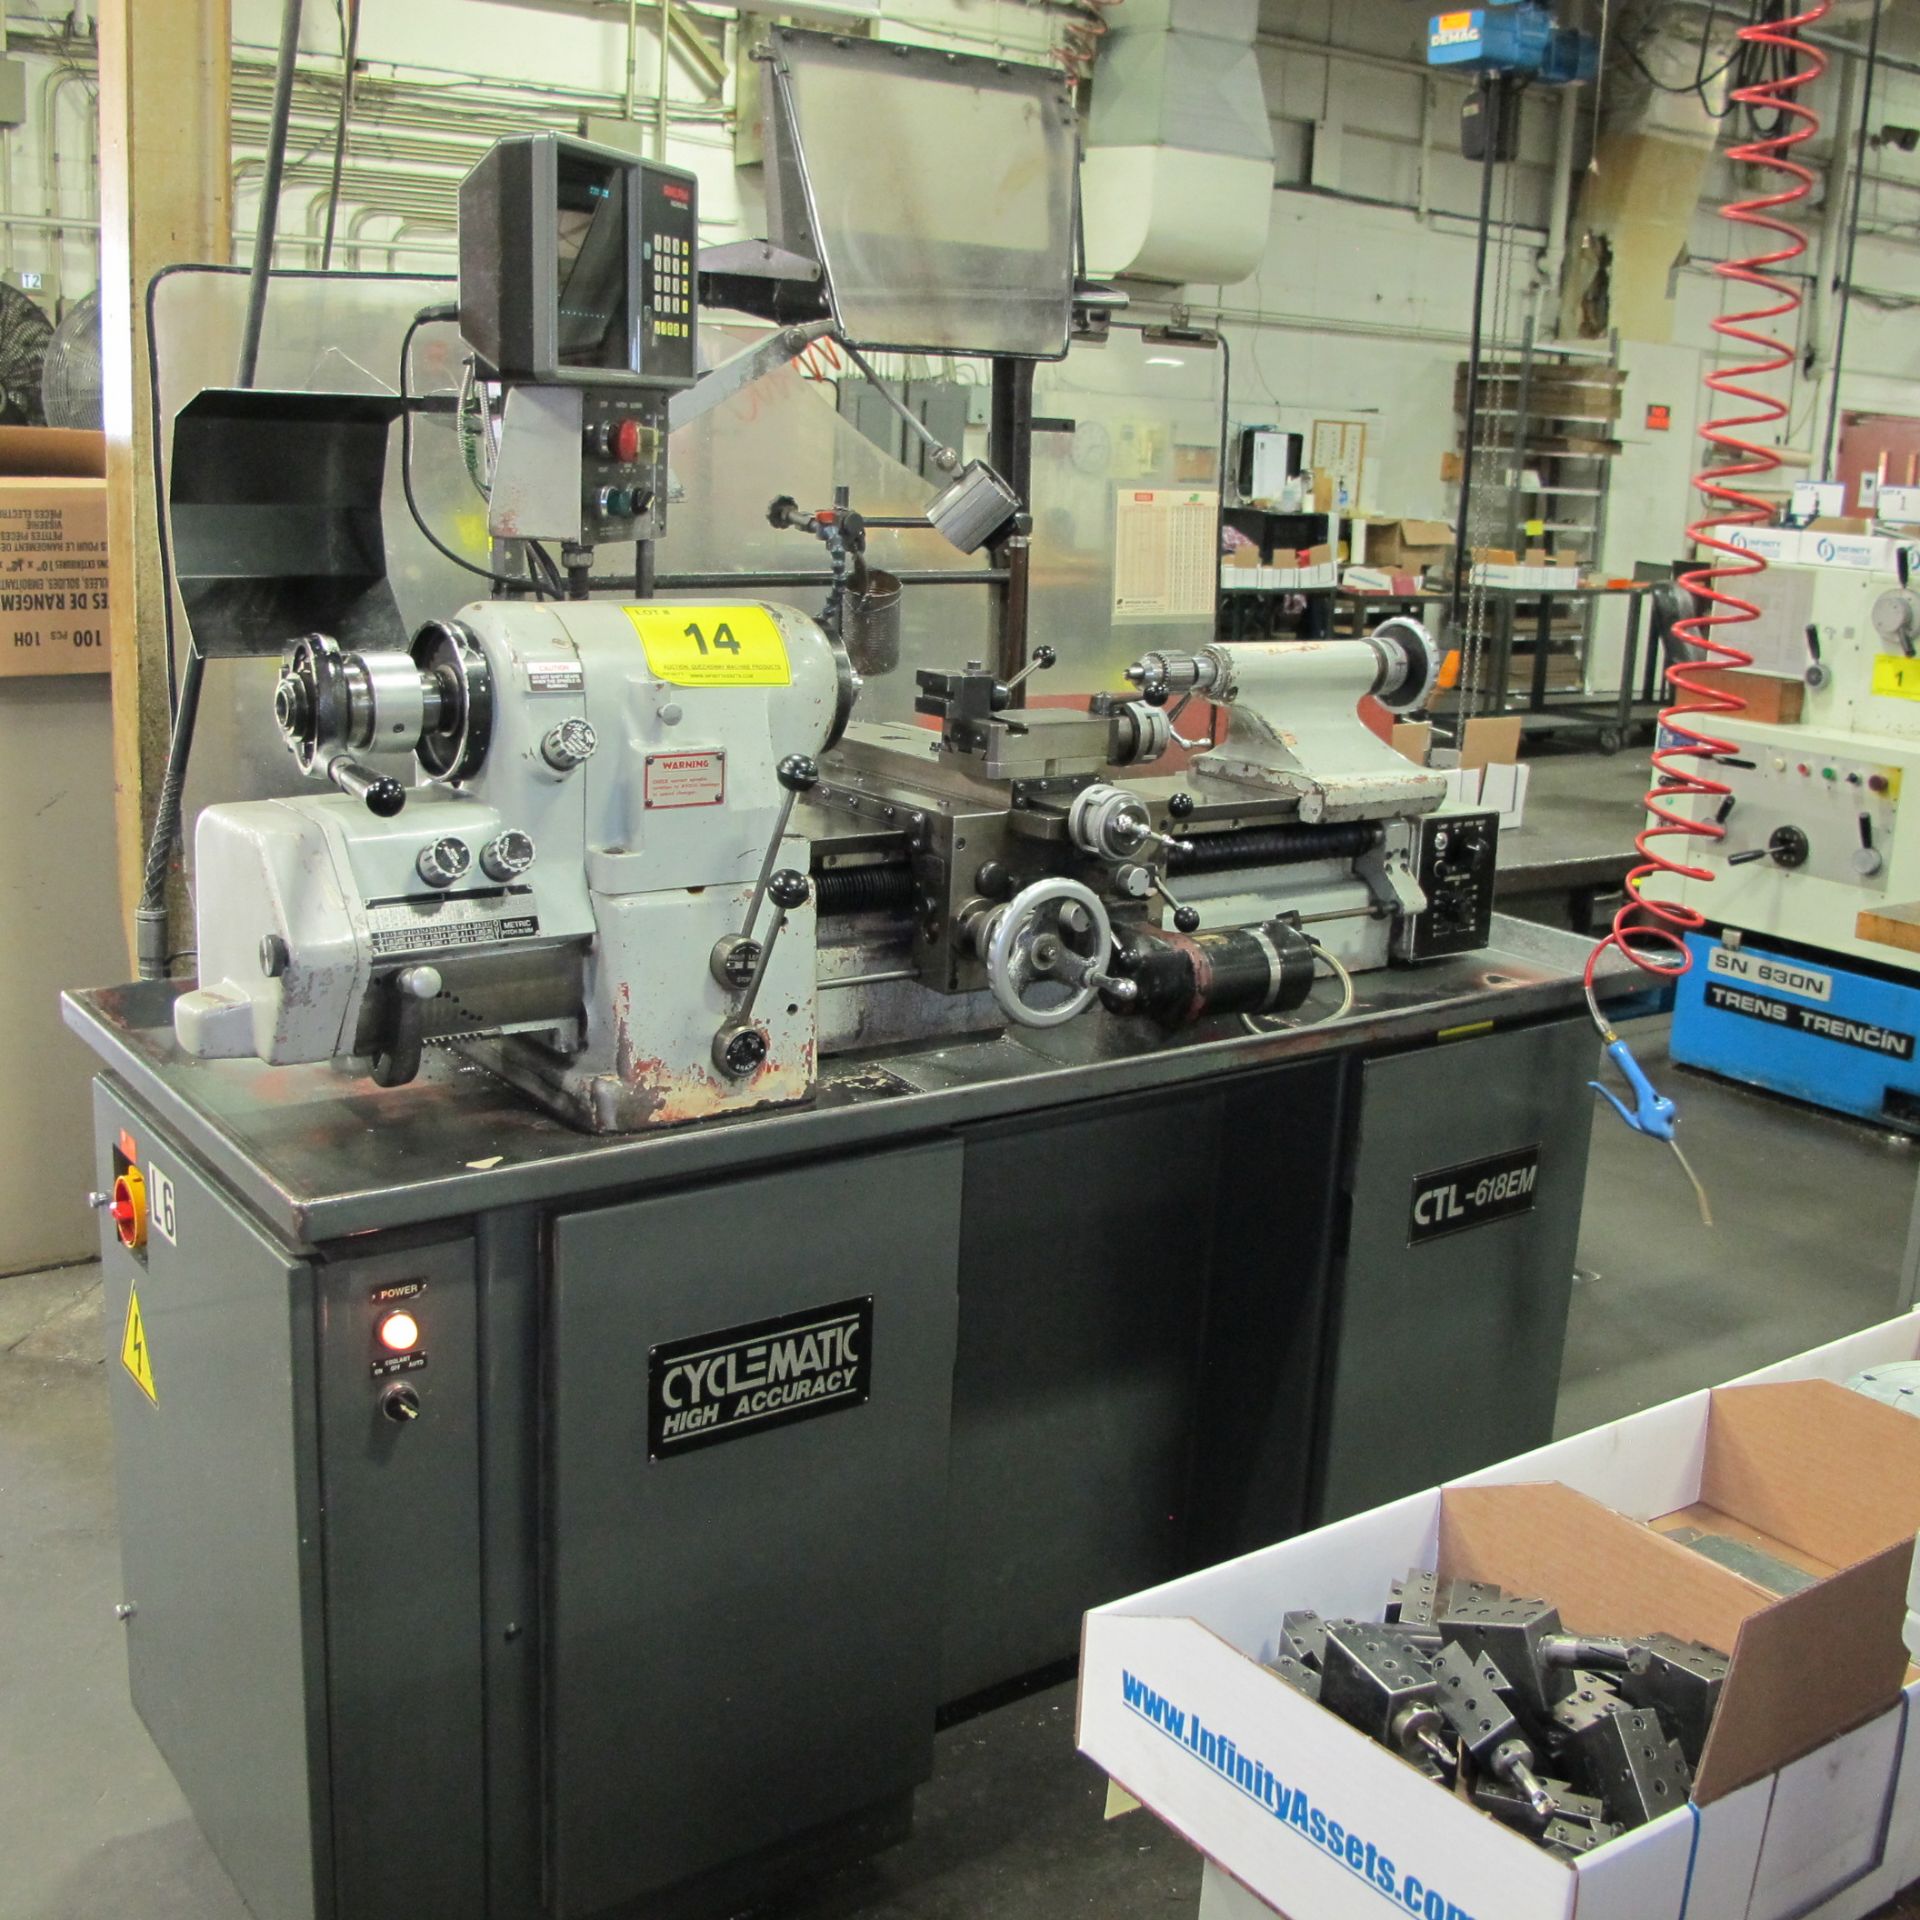 CYCLEMATIC MODEL CLT-618EM TOOL ROOM LATHE, ANILAM WIZARD 450L DRO, 11” SWING, 9" MAX CUT DIA., 18" - Image 4 of 16